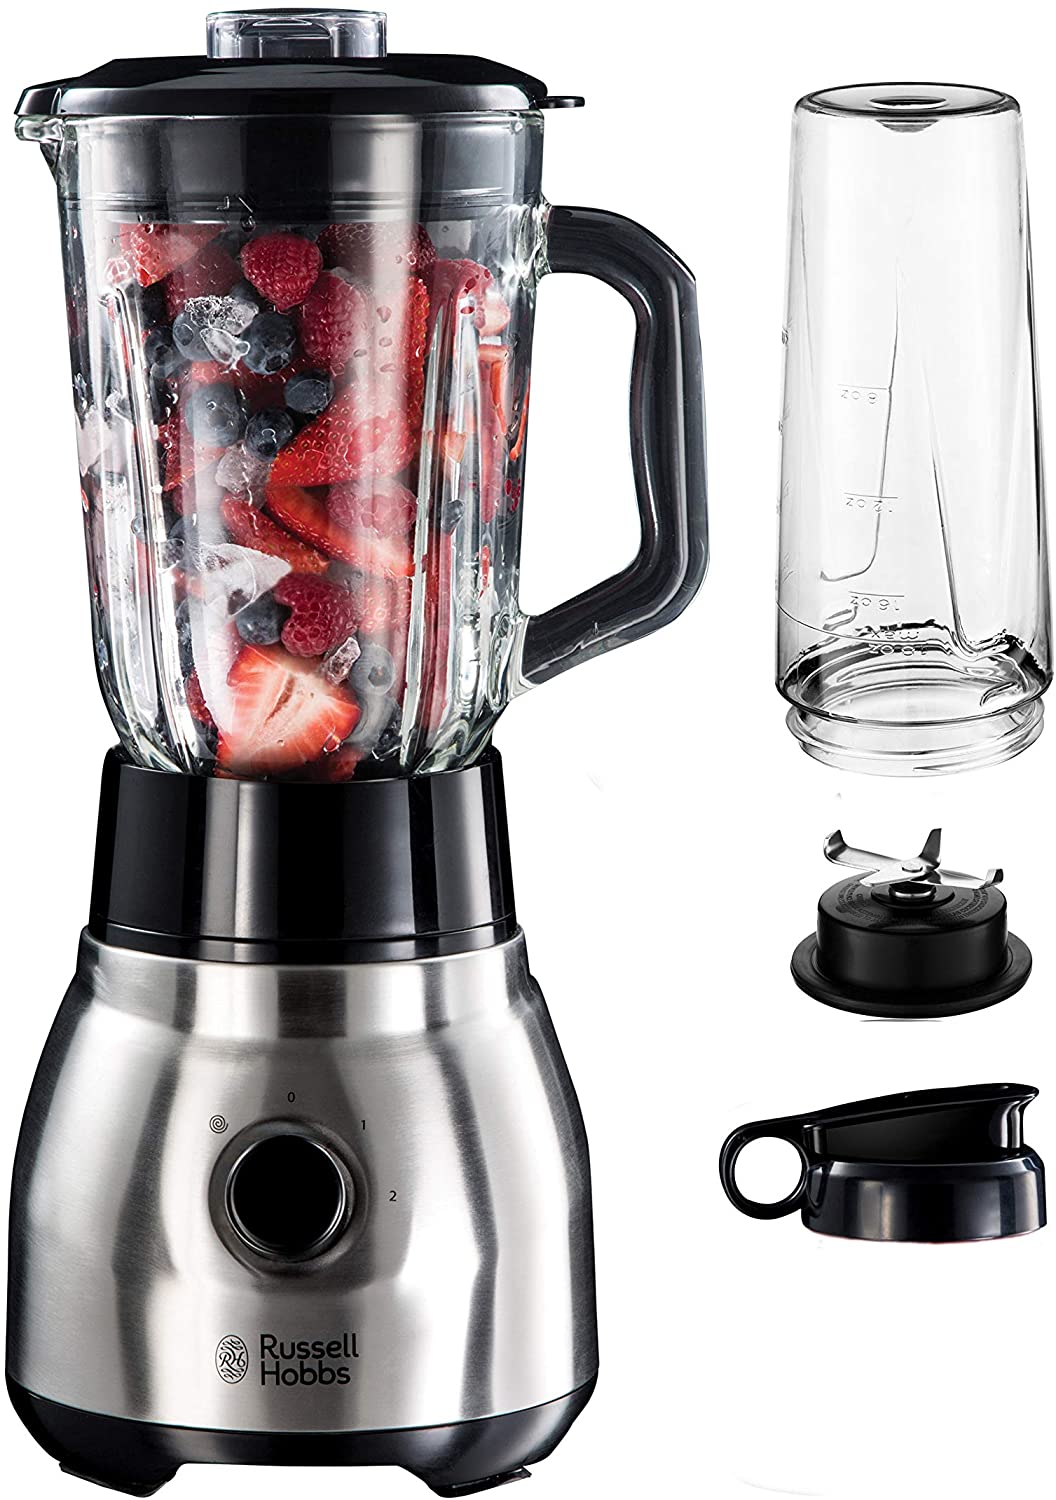 Russell Hobbs Stand Mixer Glass Steel 2-in-1, incl. to-go mug & lid, 1.5l glass container, blender 0.8 HP motor, pulse/ice crush function, mini smoothie maker 23821-56 [Exclusive at Amazon]